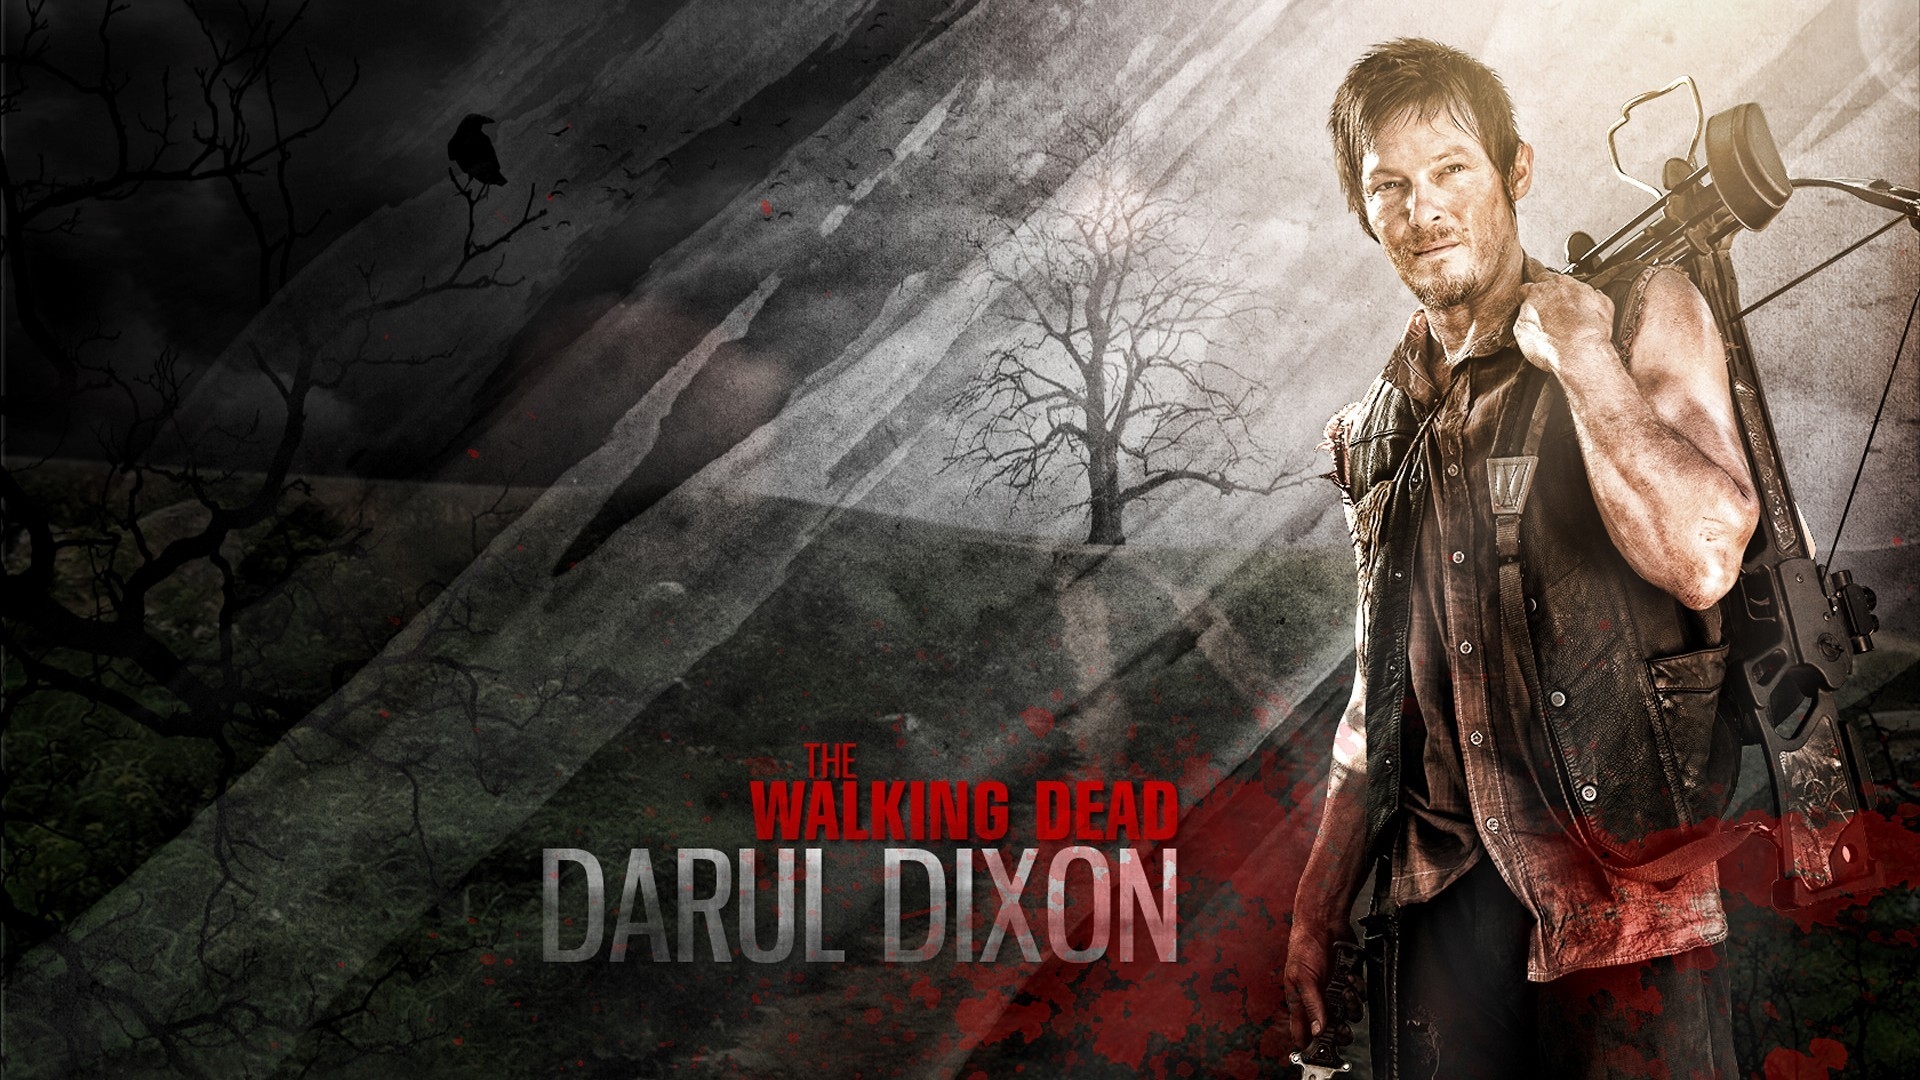 The Walking Dead Daryl Dixon for 1920 x 1080 HDTV 1080p resolution